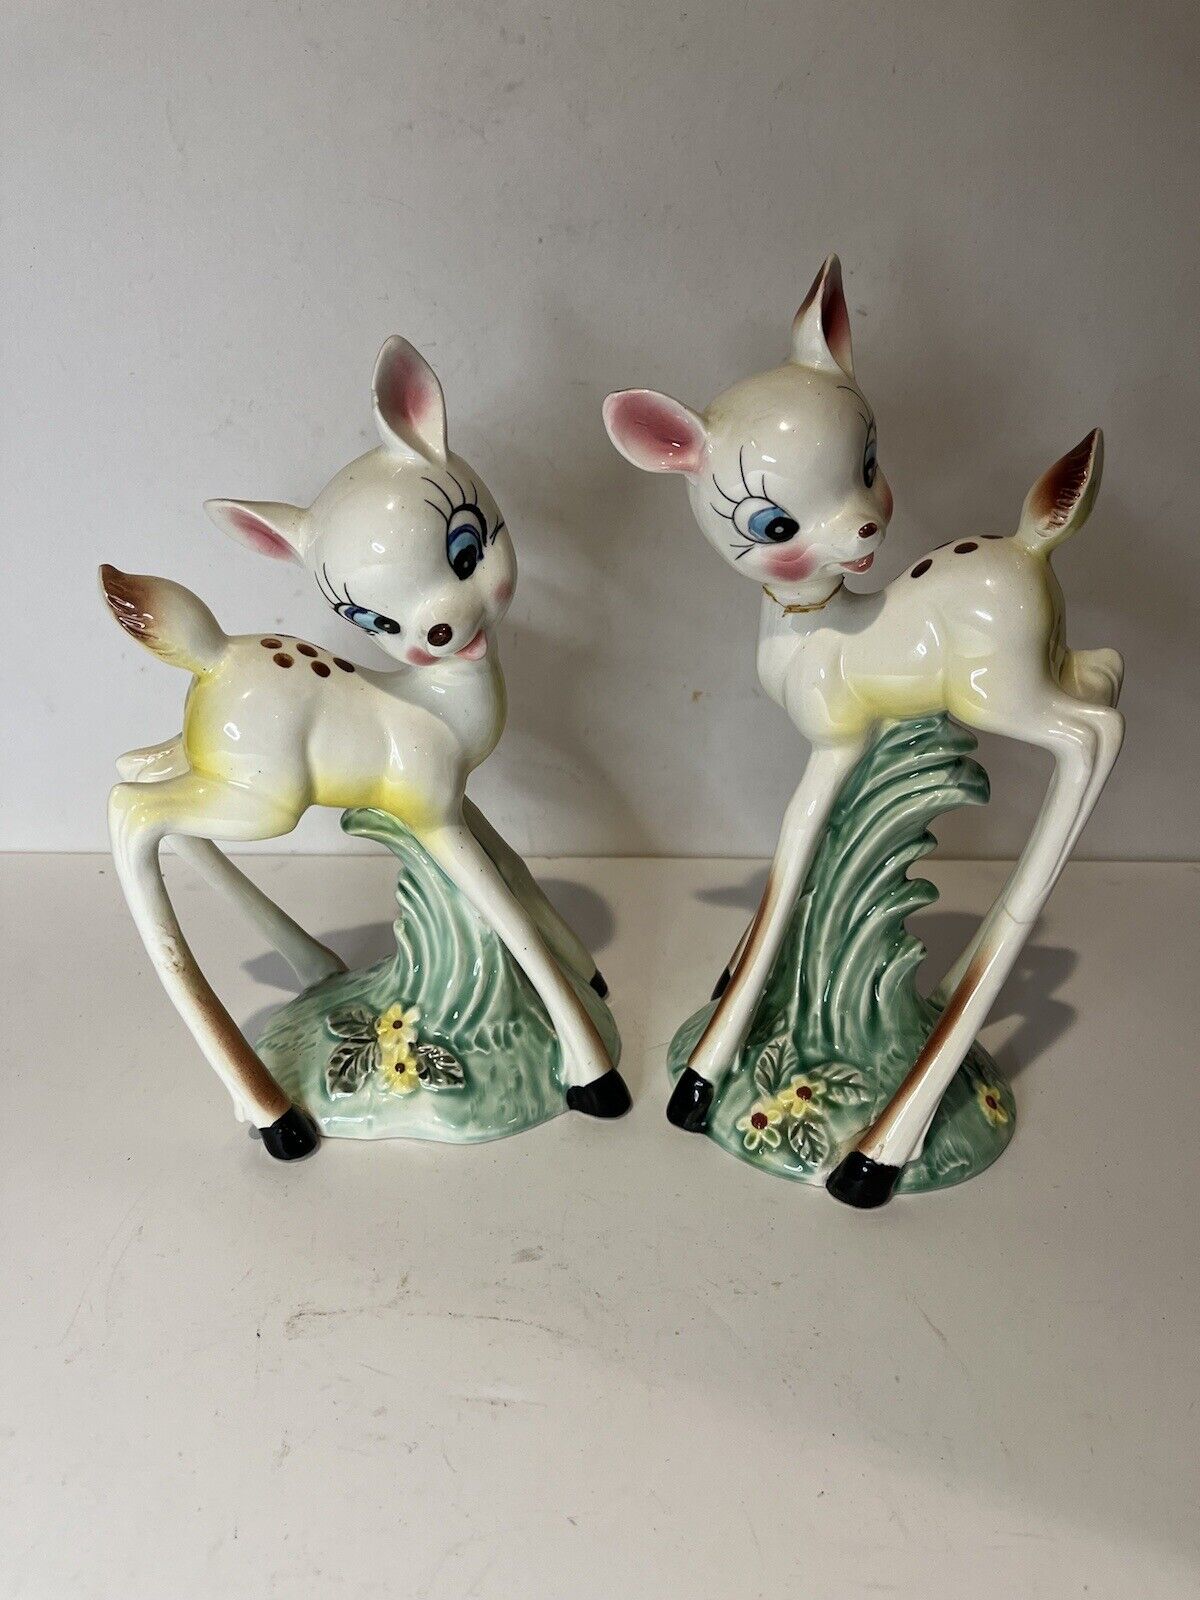 Rare Vintage Kitsch White Fawn Deer Made In Japan Figurine Pair Anamorphic